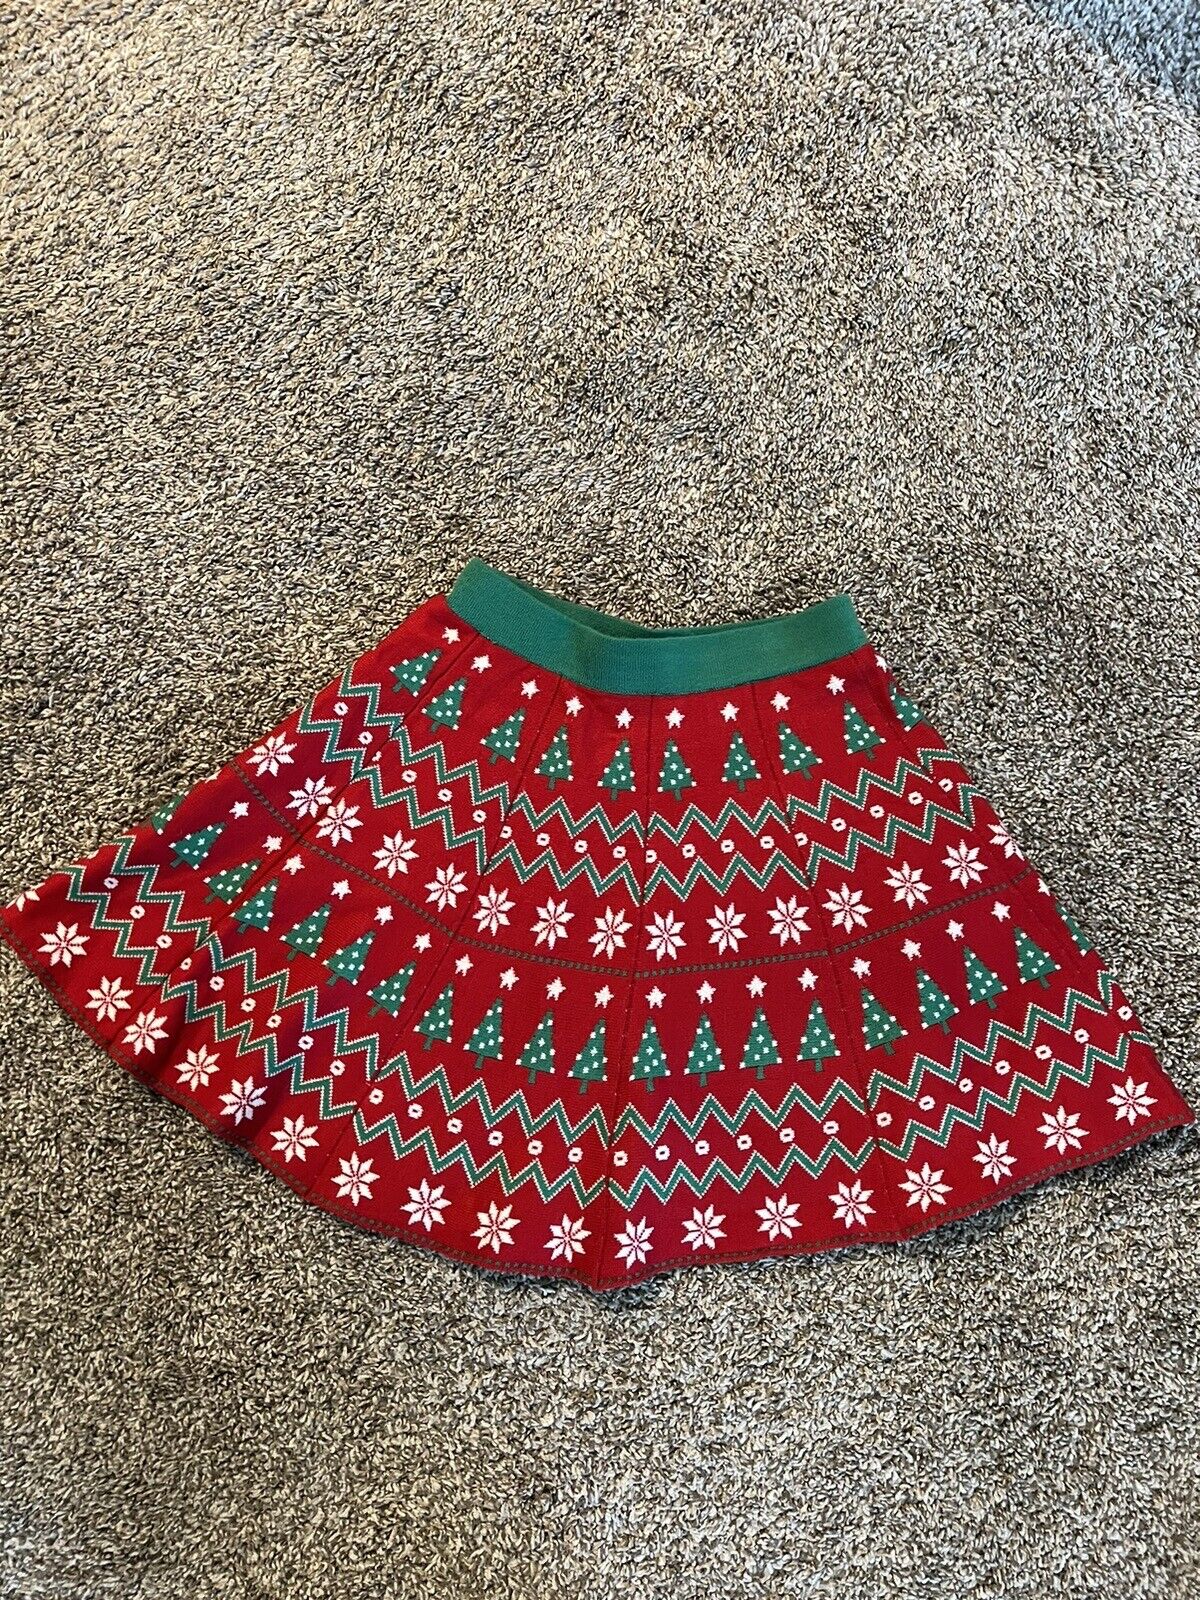 It’s Our Time Christmas Skirt, Size S